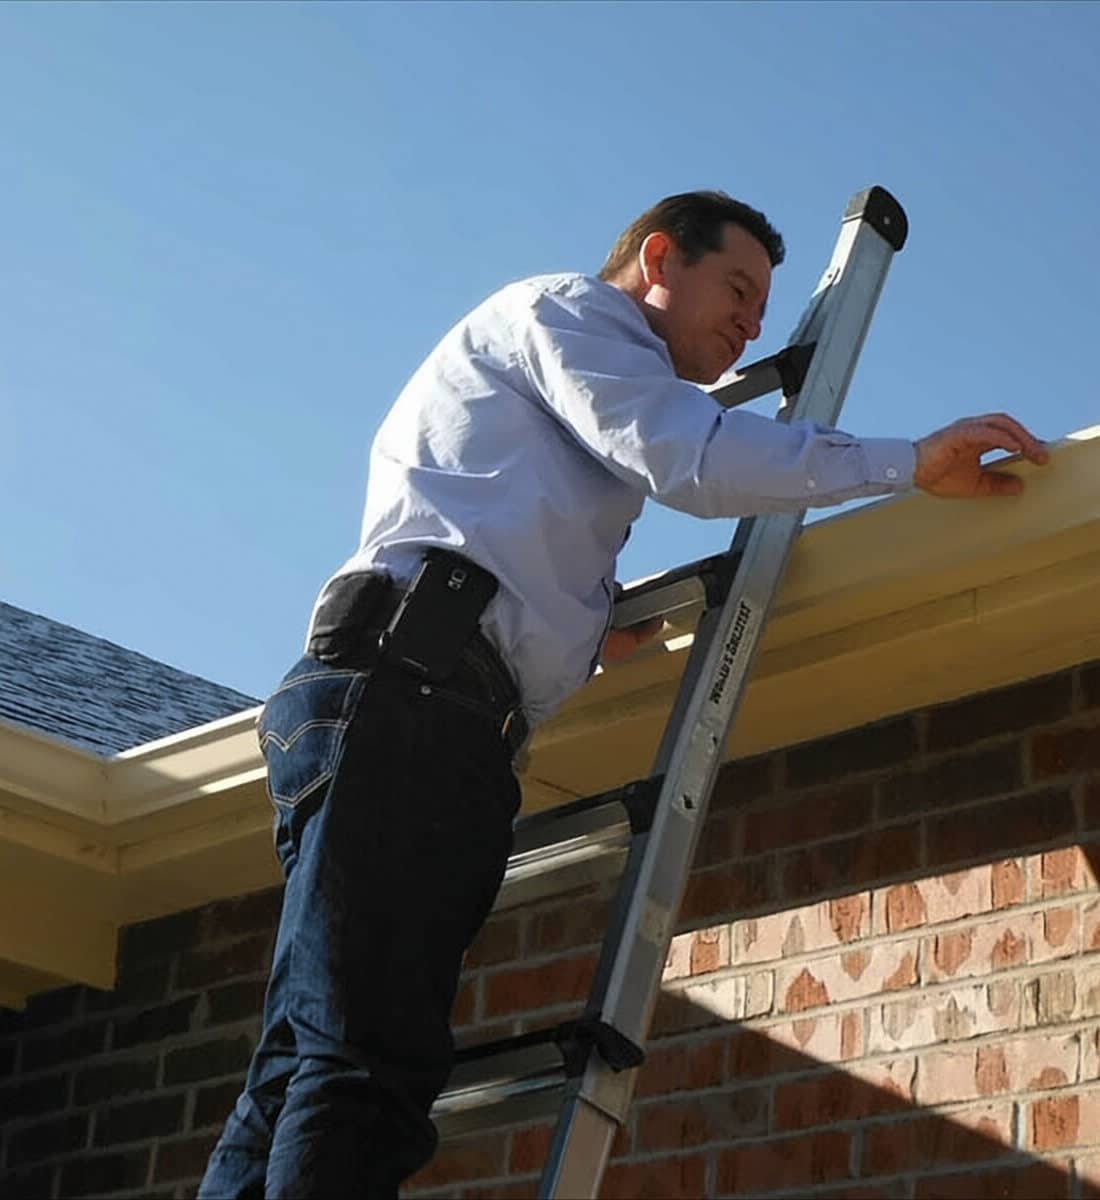 home inspector duane younger performs a home inspection on a Denver home